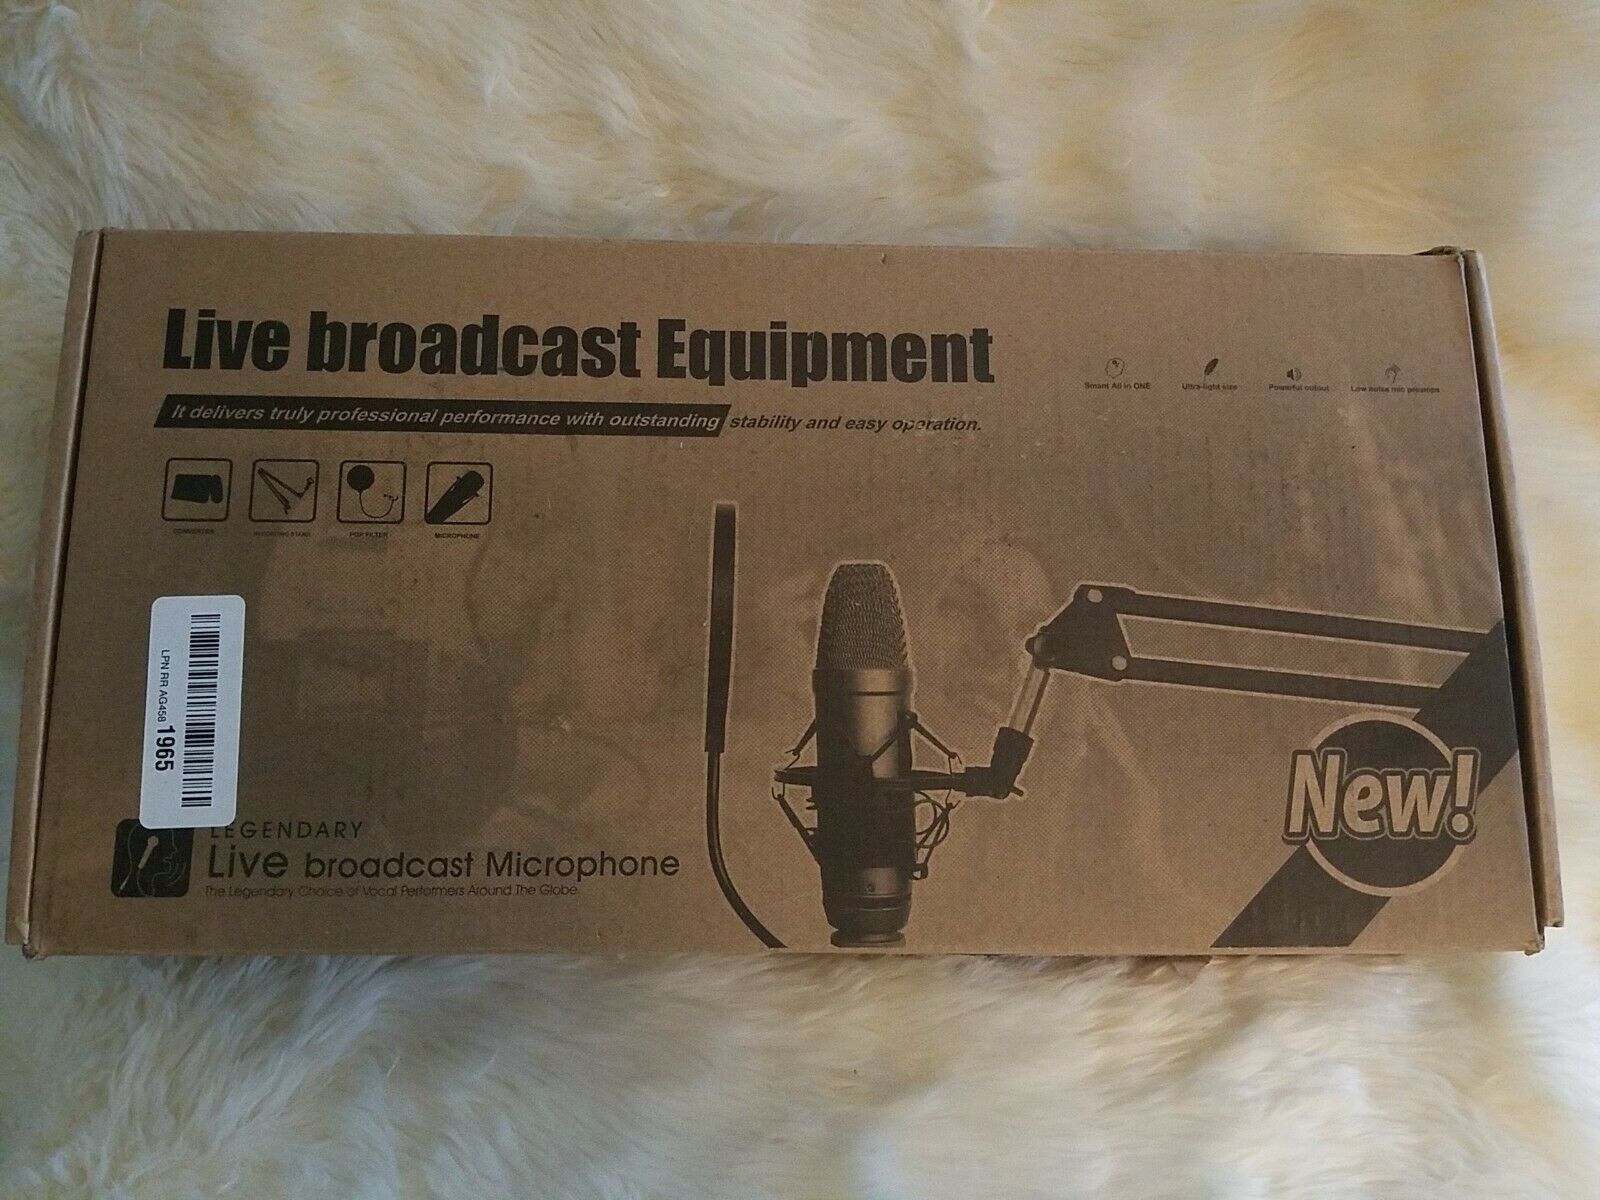 Legendary Live Broadcast Microphone - NEW IN BOX